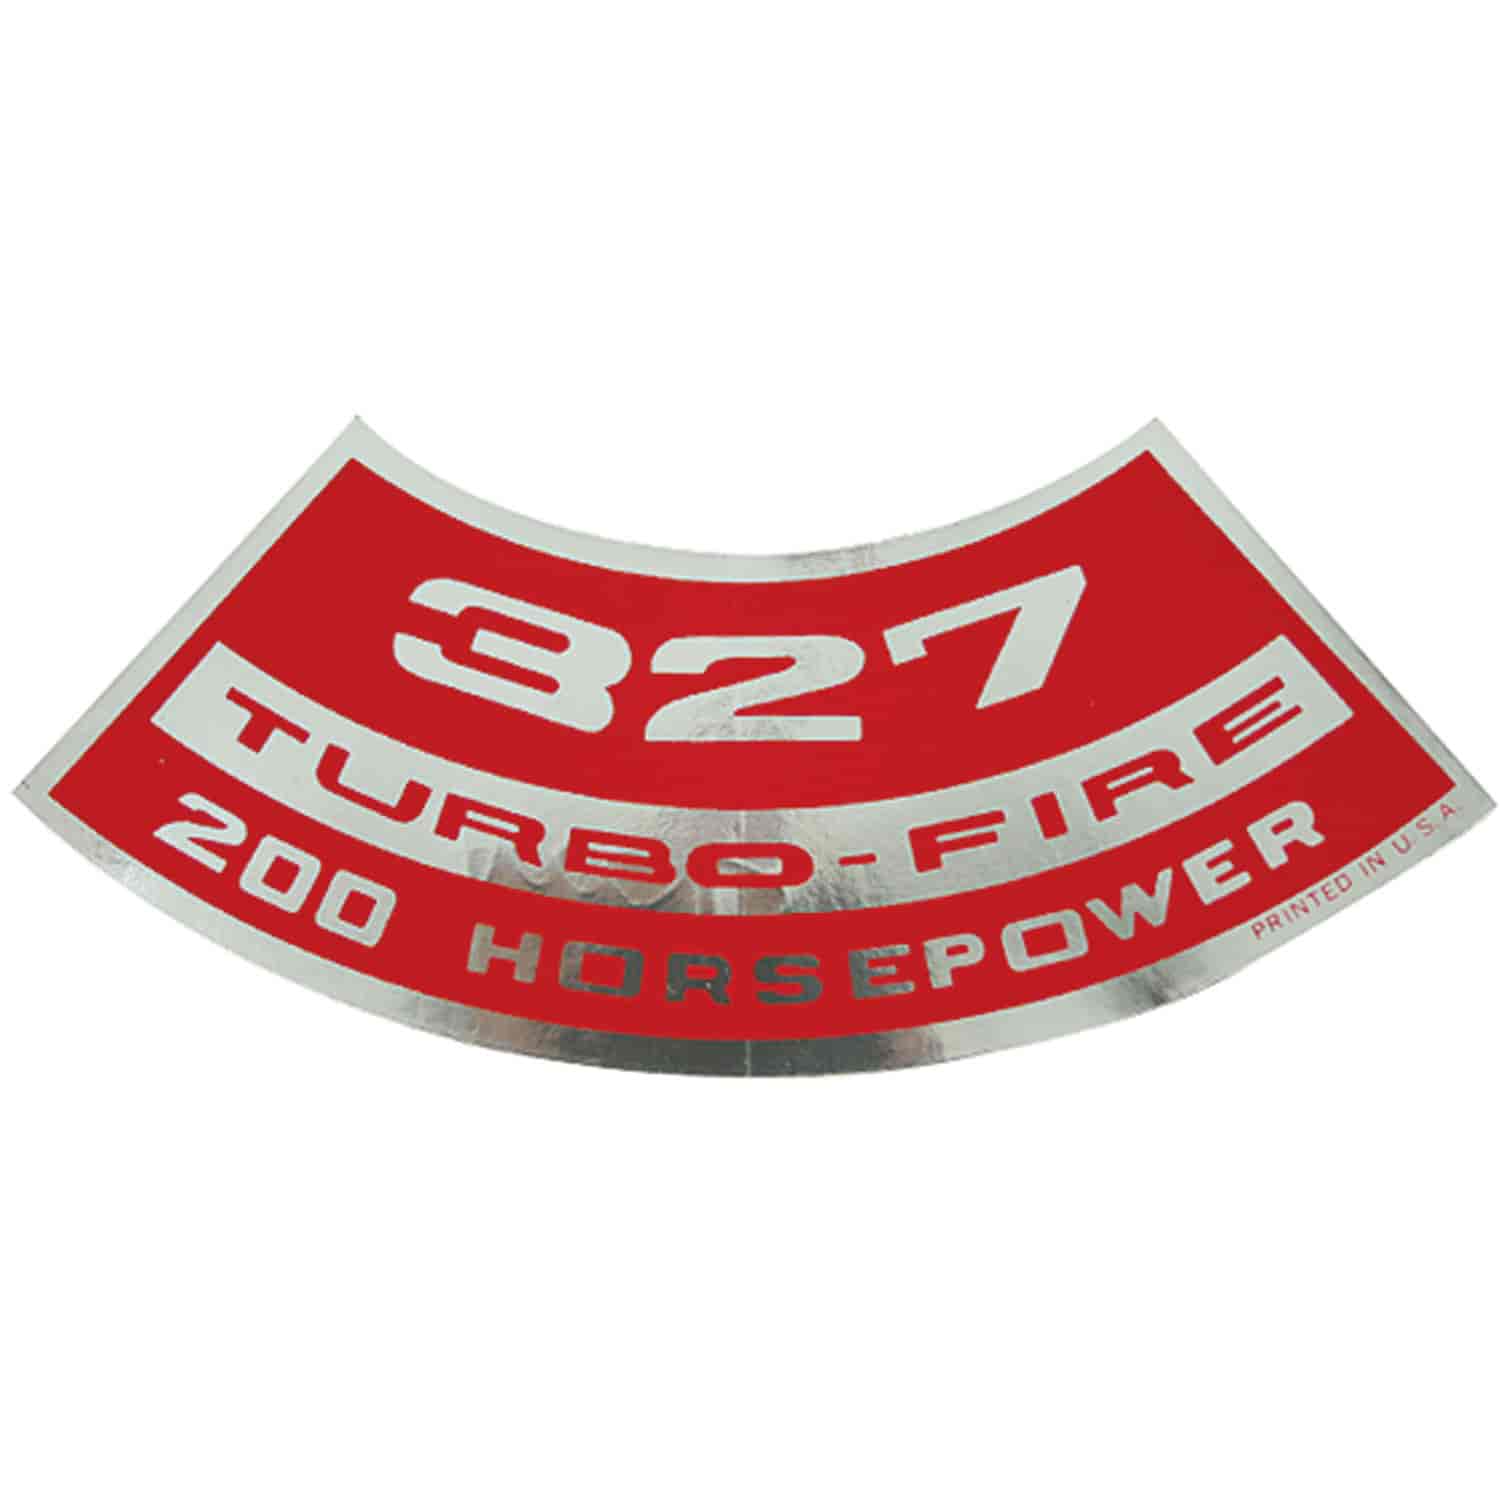 Decal Chevelle/El Camino Air Cleaner 327 200HP Turbo-Fire